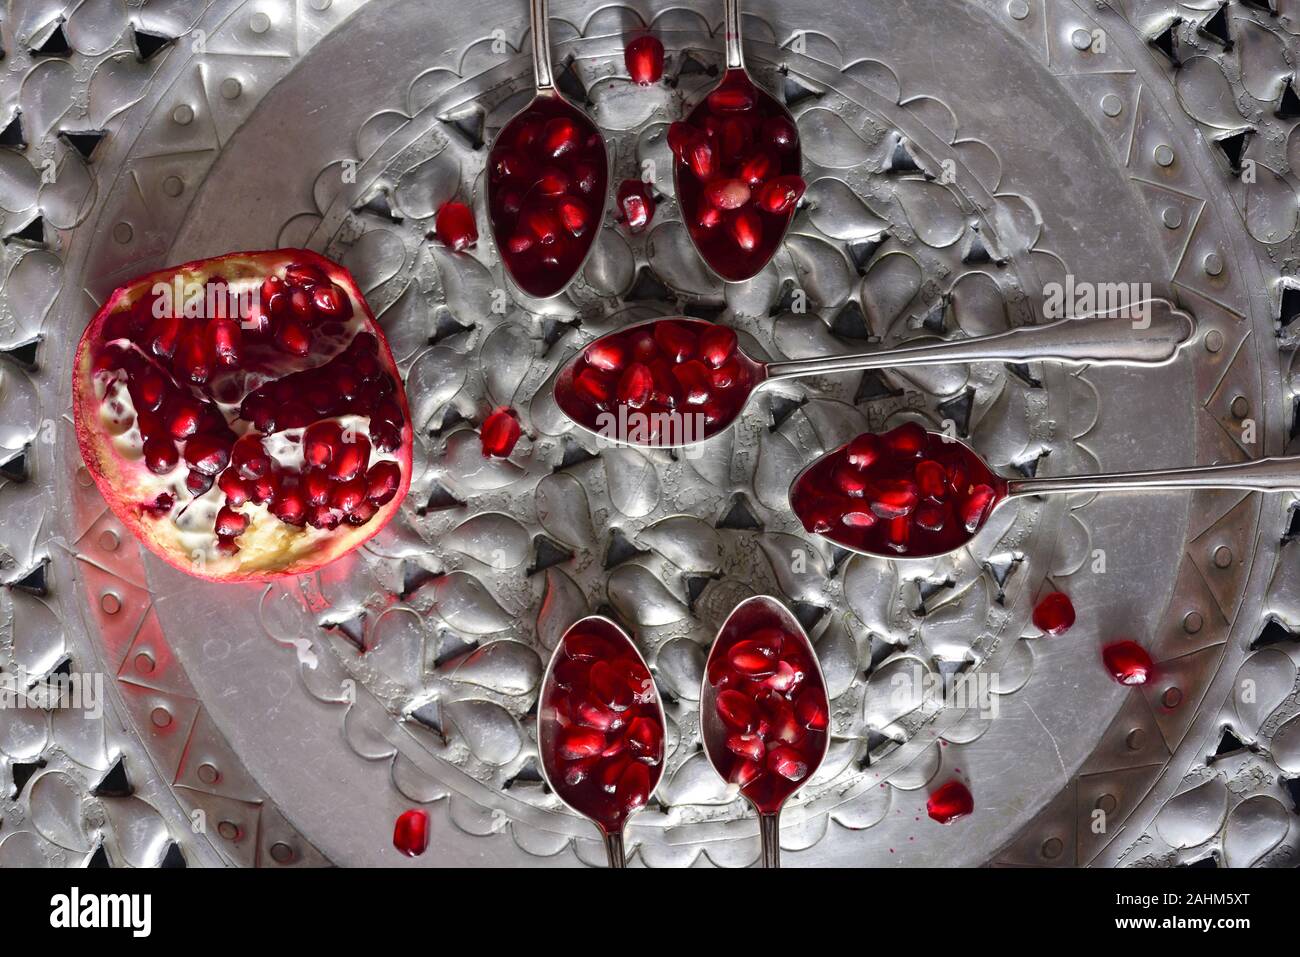 An old ornate plate made of tin with silver spoons holding pomegranate seeds along with half a pomegranate Stock Photo